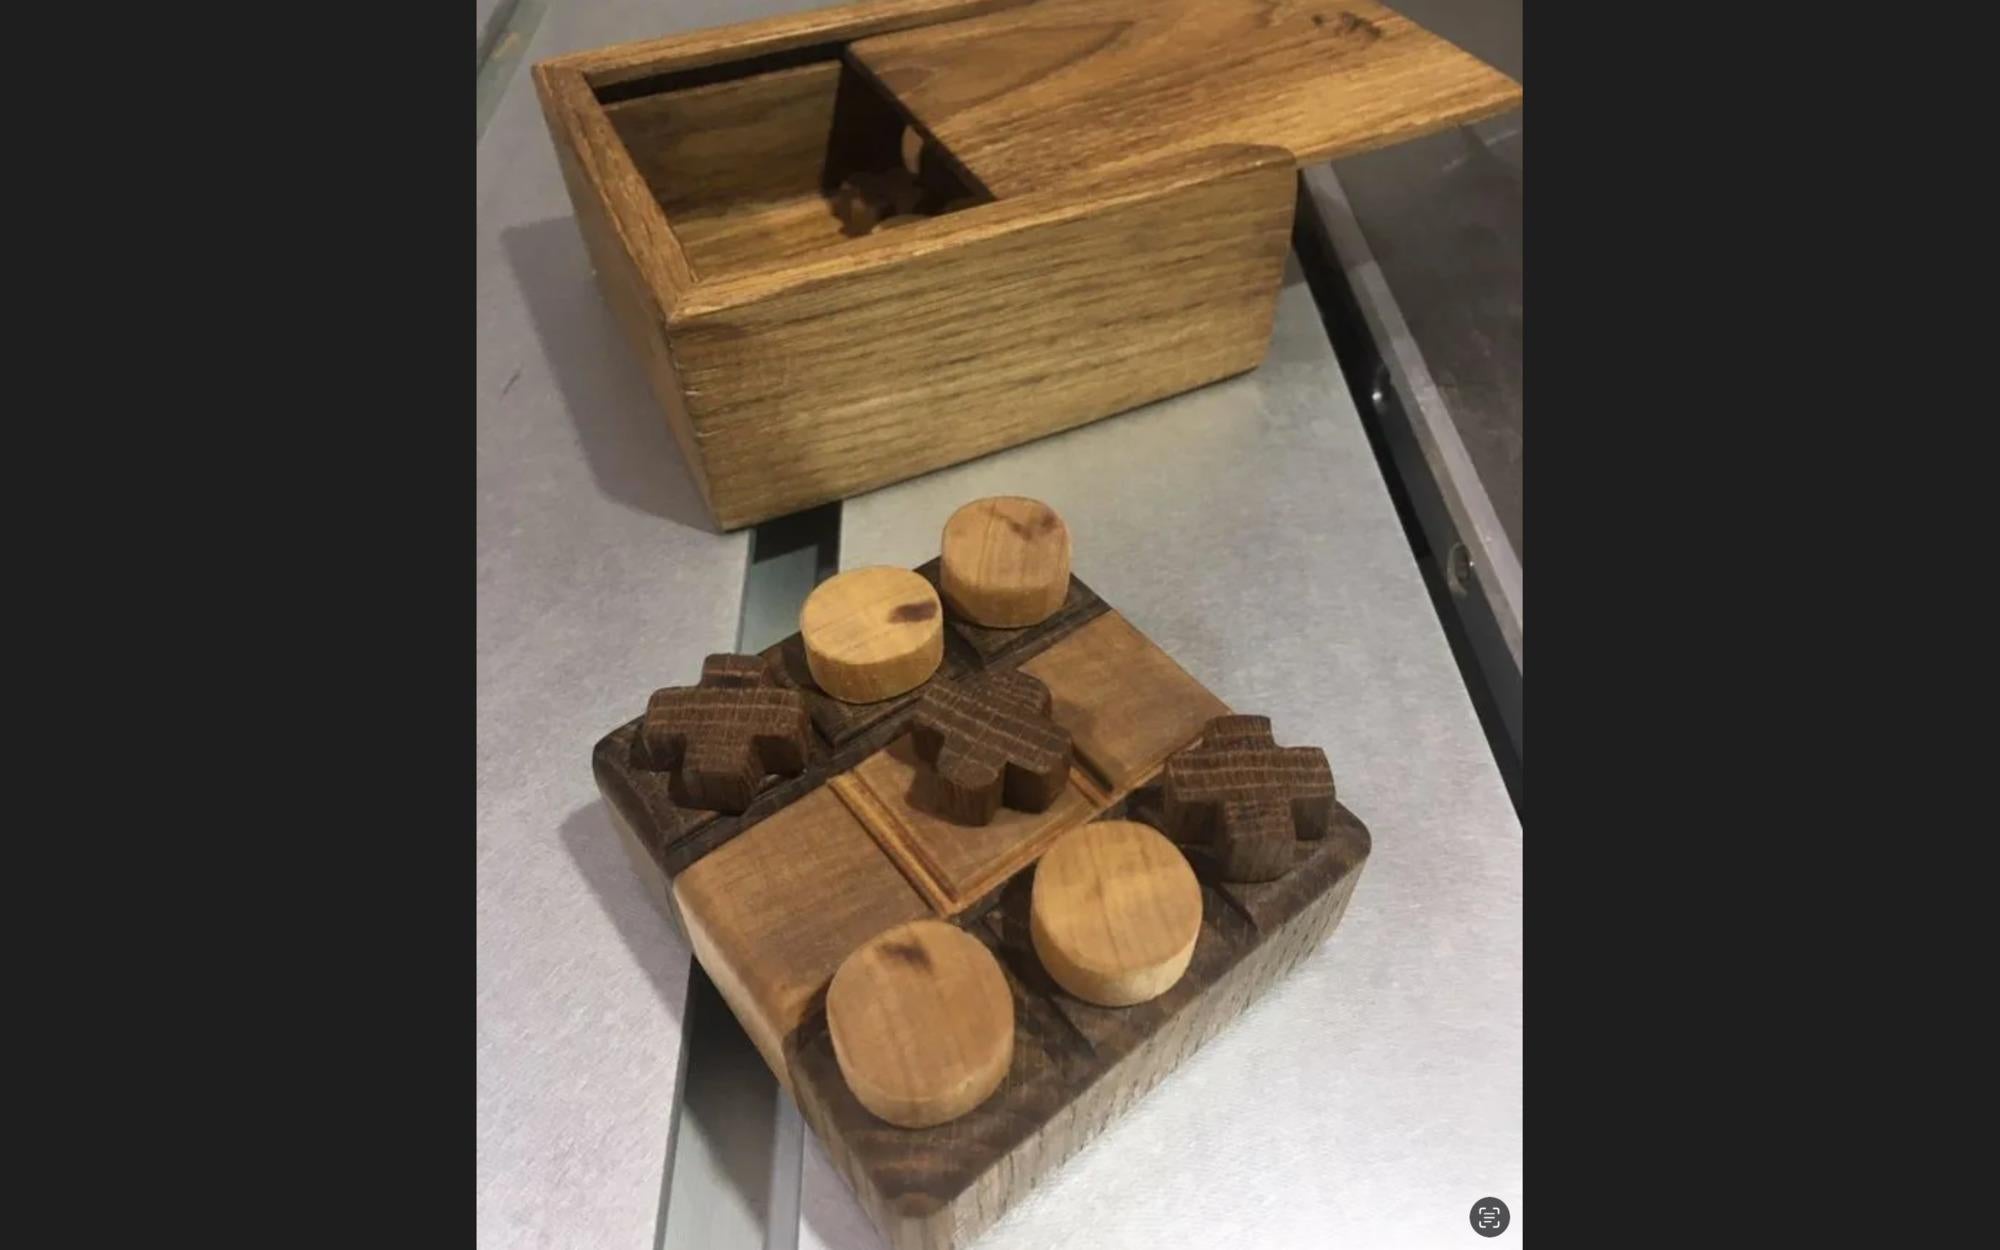 Tic-tac-toe game in a box. Oak material. 11x13 handmade.
This would be the perfect gift for Valentine's Day. luxury watch organizer,

You can buy this clock storage for Christmas gift, for men or women, it will be a luxury gift for father.